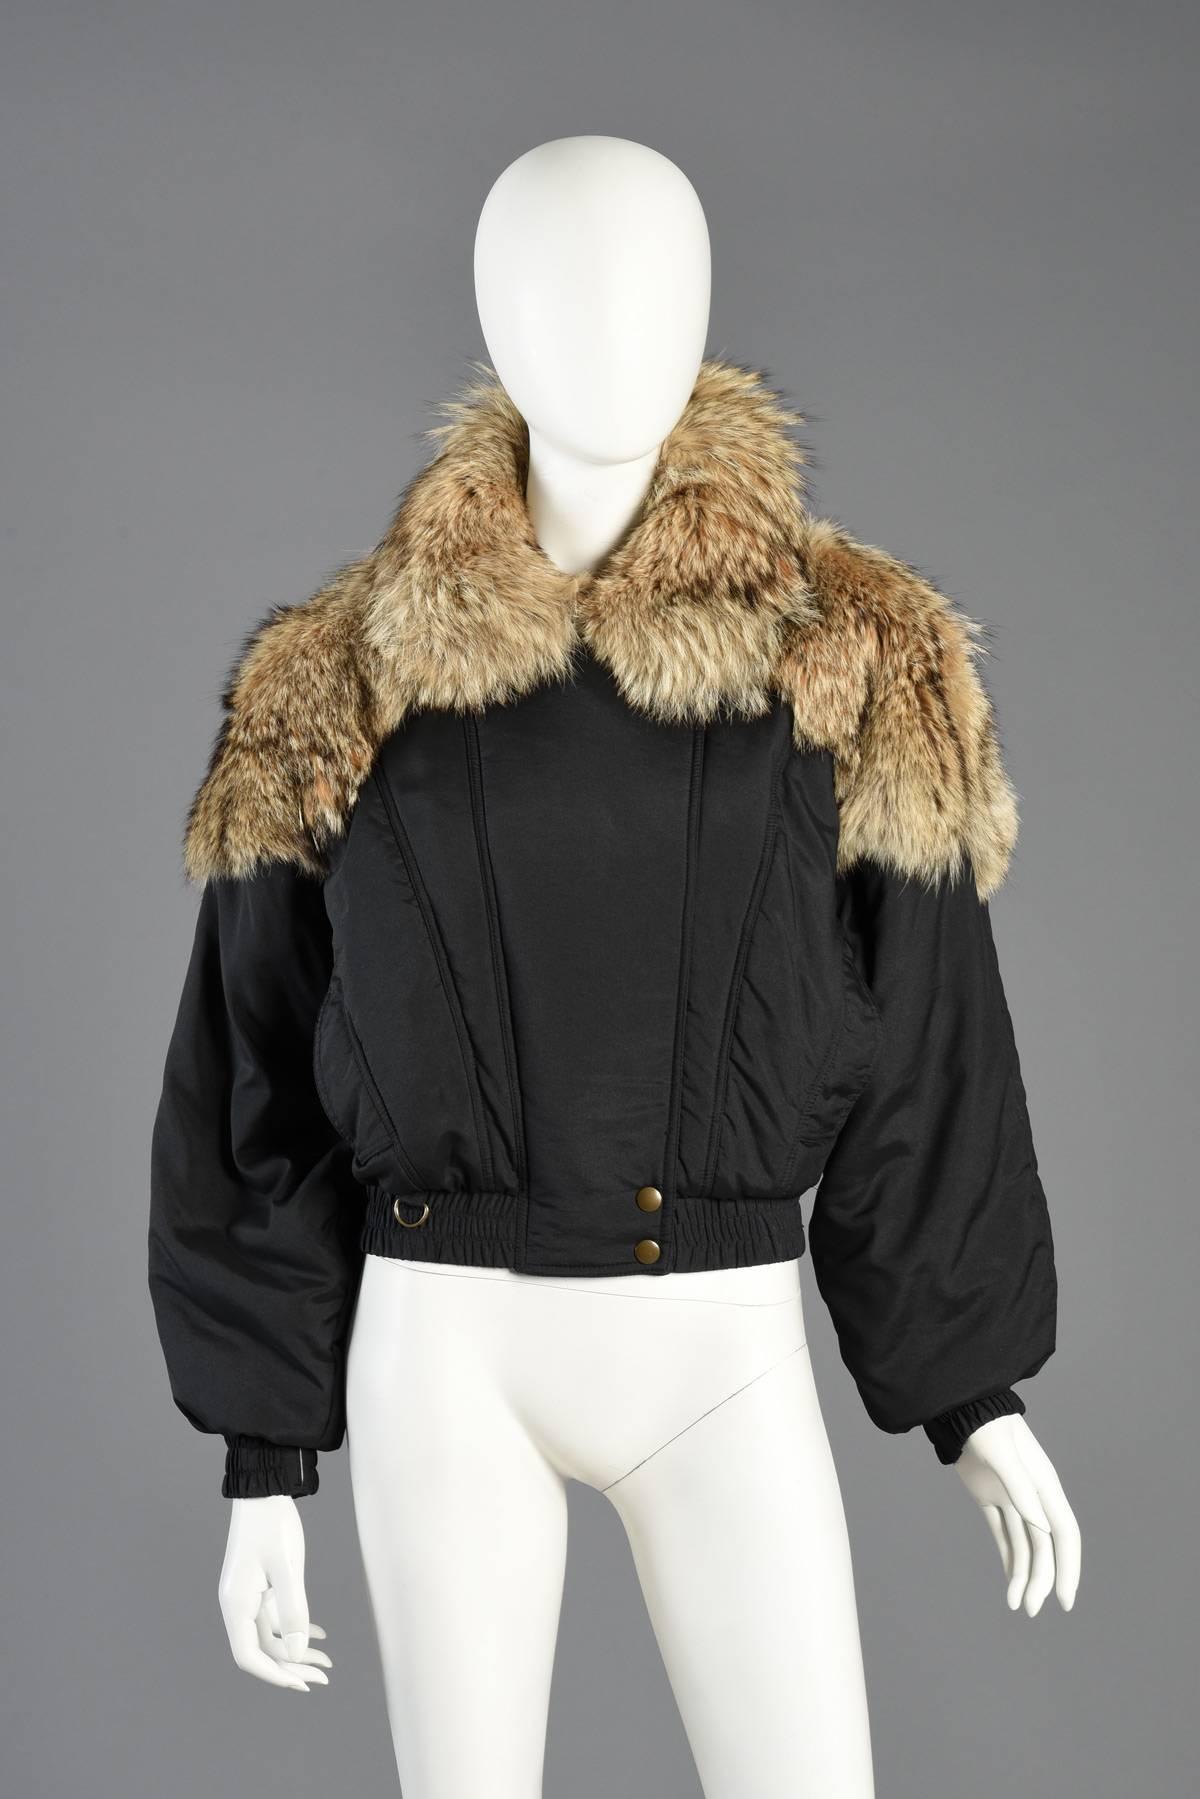 Make a statement on the slopes or Midtown with this awesome vintage 1980s puffy ski jacket. Black puffy bomber/ski style jacket with massive coyote fur mantle. Fully lined. Fur is soft + supple with no shedding or odors. Excellent vintage condition.